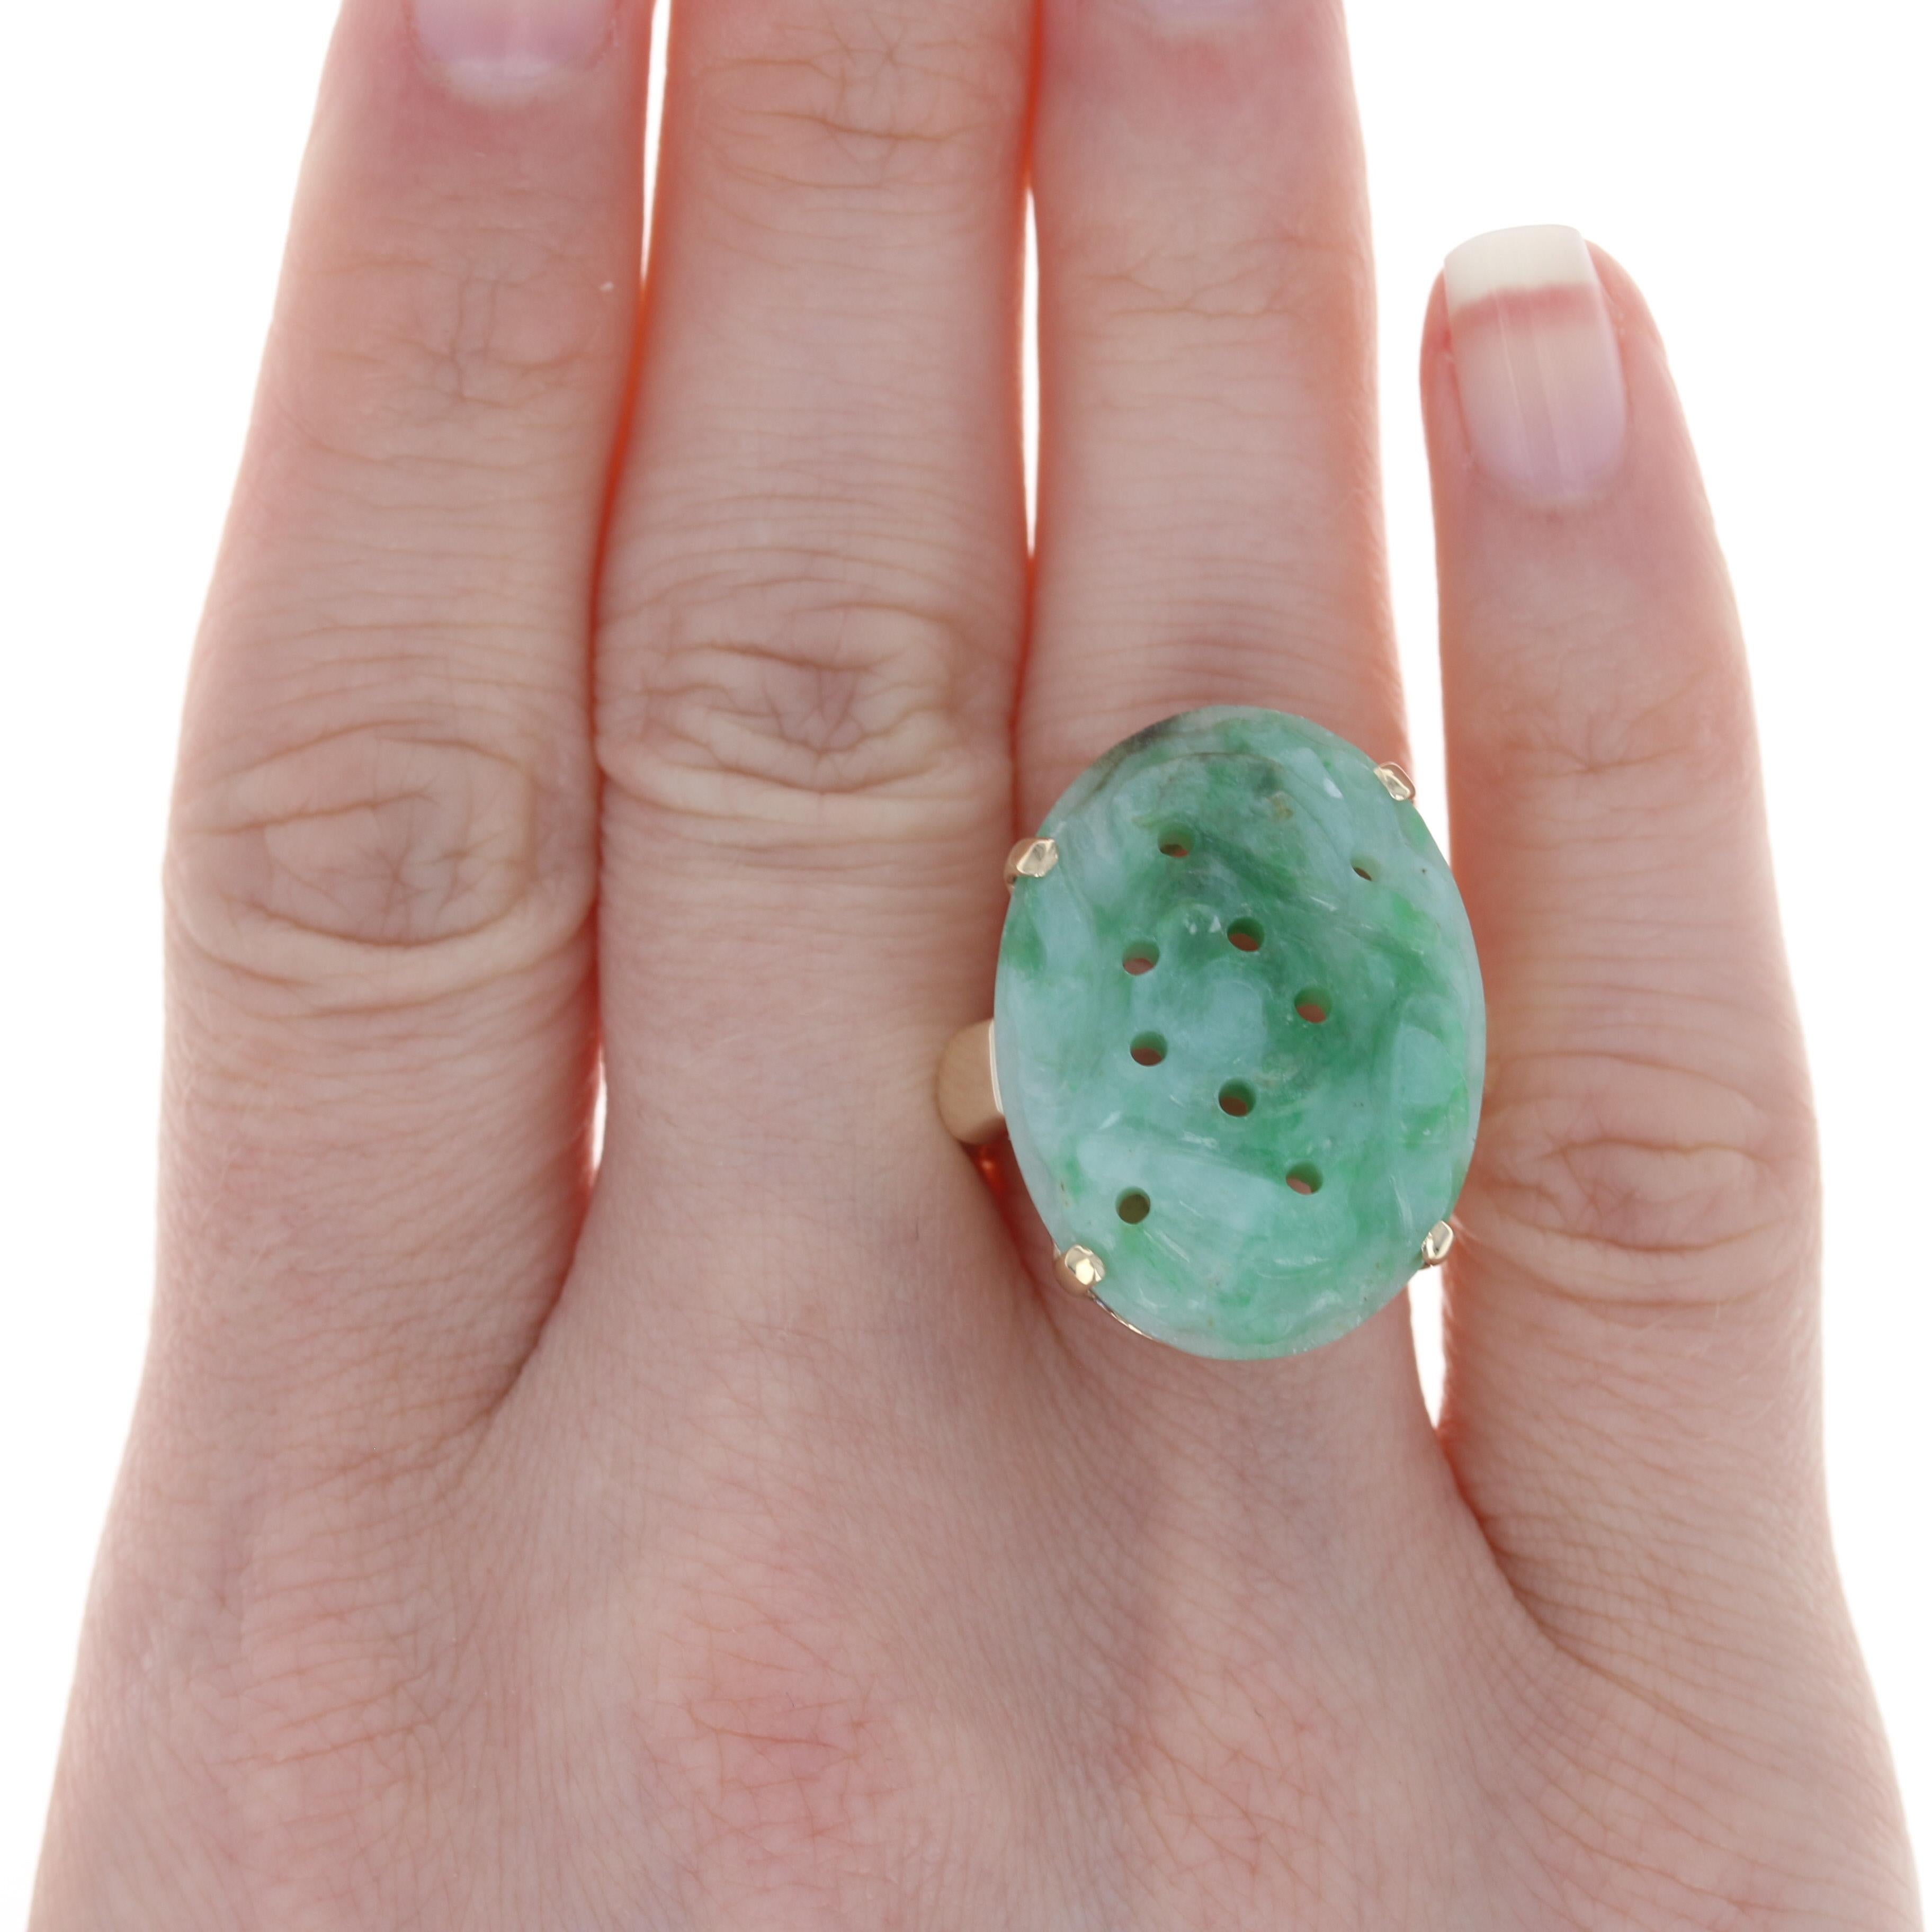 Size: 8 1/4
 Sizing Fee: Can be re-sized up 2 sizes for $35 or down 1 size for $30
 
 Metal Content: 14k Yellow Gold
 
 Stone Information: 
 Genuine Carved Jadeite
 Treatment: Routinely Enhanced
 Colors: Green & White
 Size: 26.7mm x 19.7mm
 
